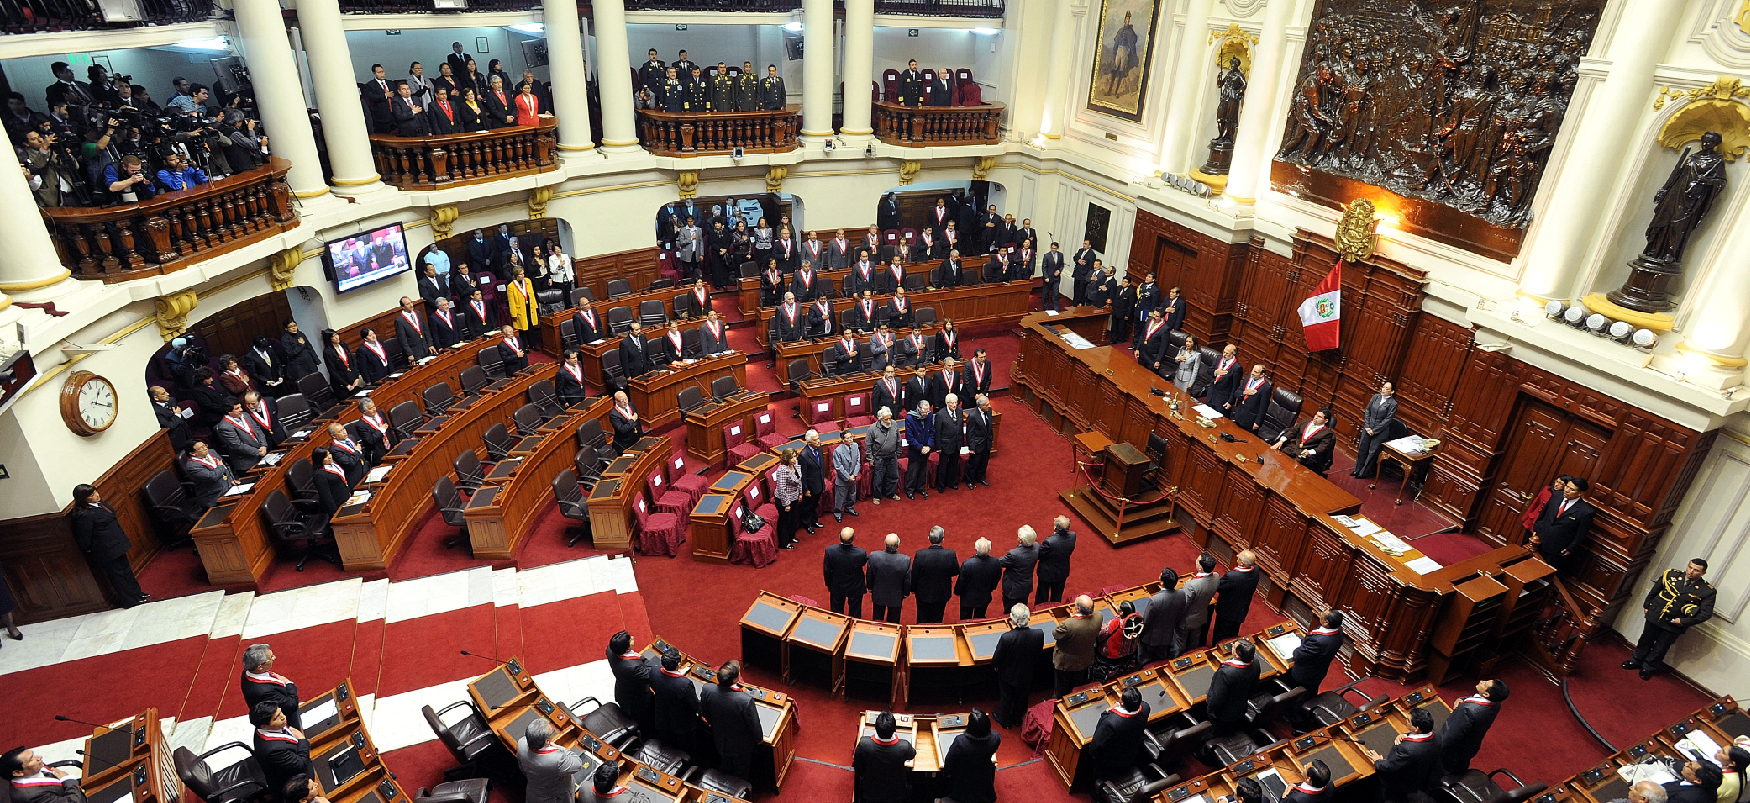 In a legislative chamber an assembly of professionally dressed people stand behind wooden desks, arranged in a tiered semicircle, facing a long rostrum, while additional people stand and look on from the gallery above.